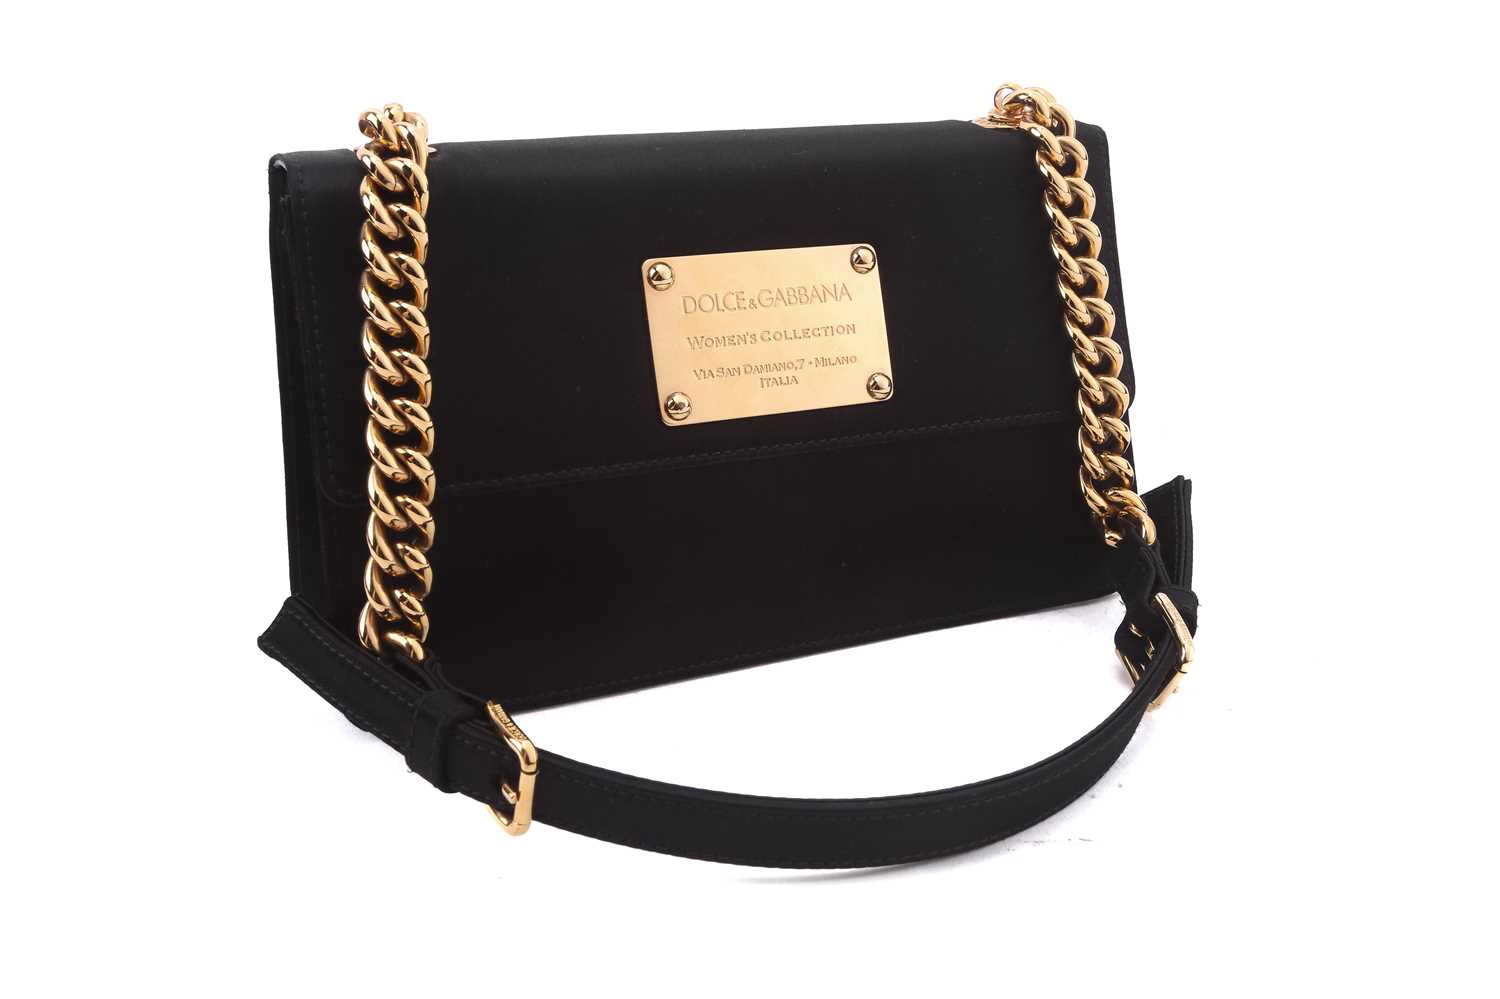 Dolce & Gabbana - 'Miss Belle' shoulder flap bag in black satin, with leather trims and pink satin - Image 4 of 8